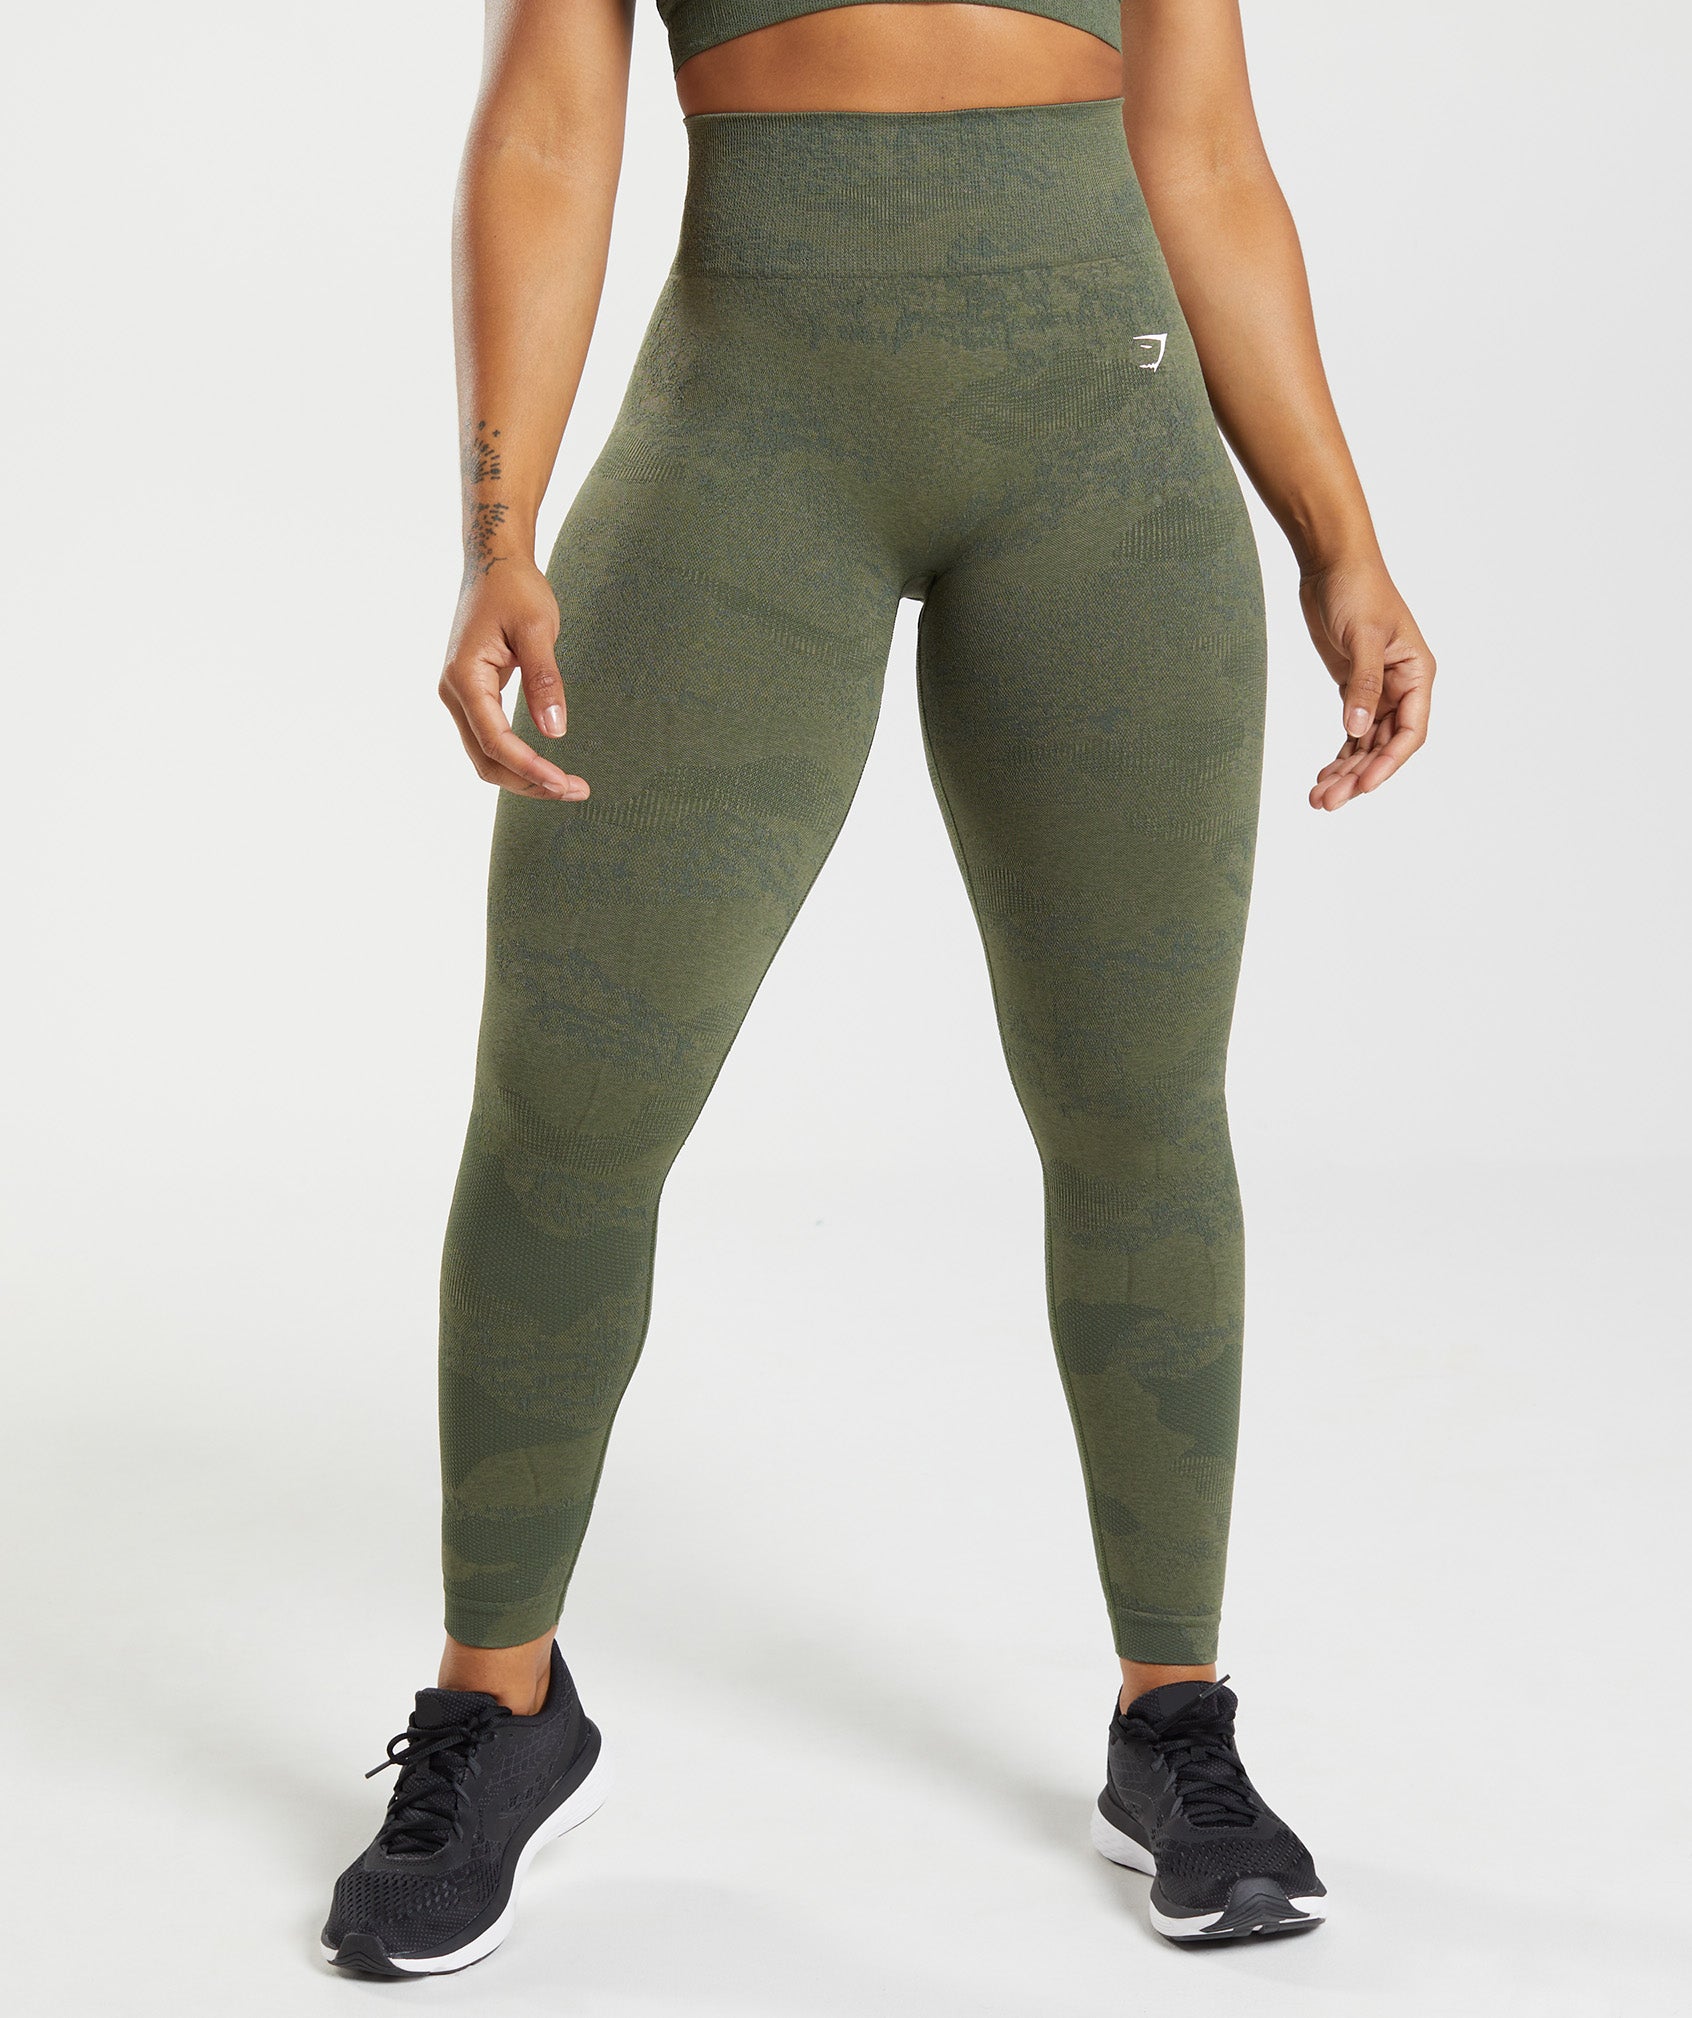 Adapt Camo Seamless Leggings in Moss Olive/Core Olive - view 1